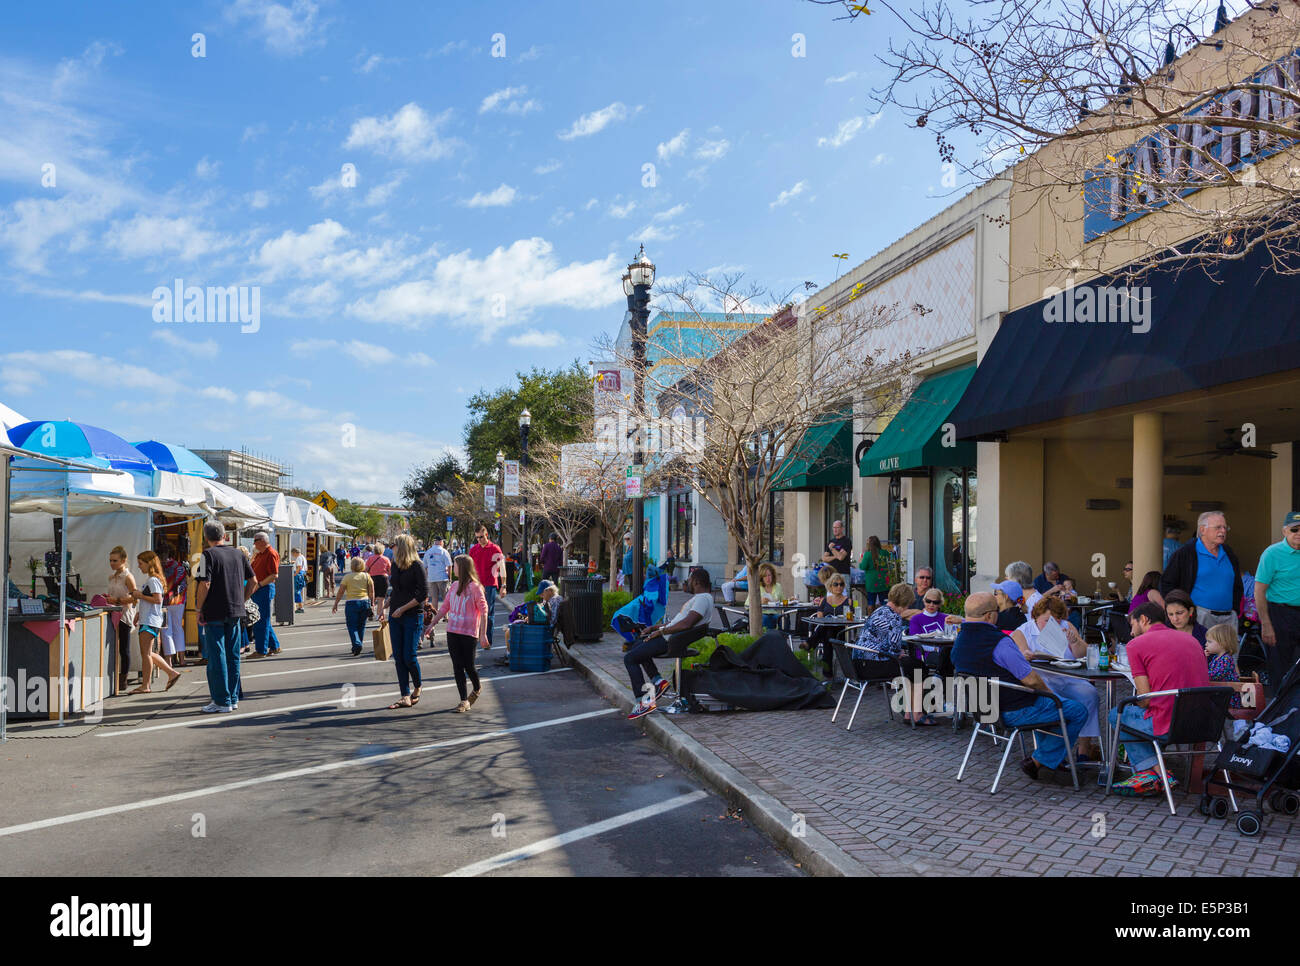 The San Marco district of Jacksonville during the San Marco Art Festival in November 2013, Florida, USA Stock Photo